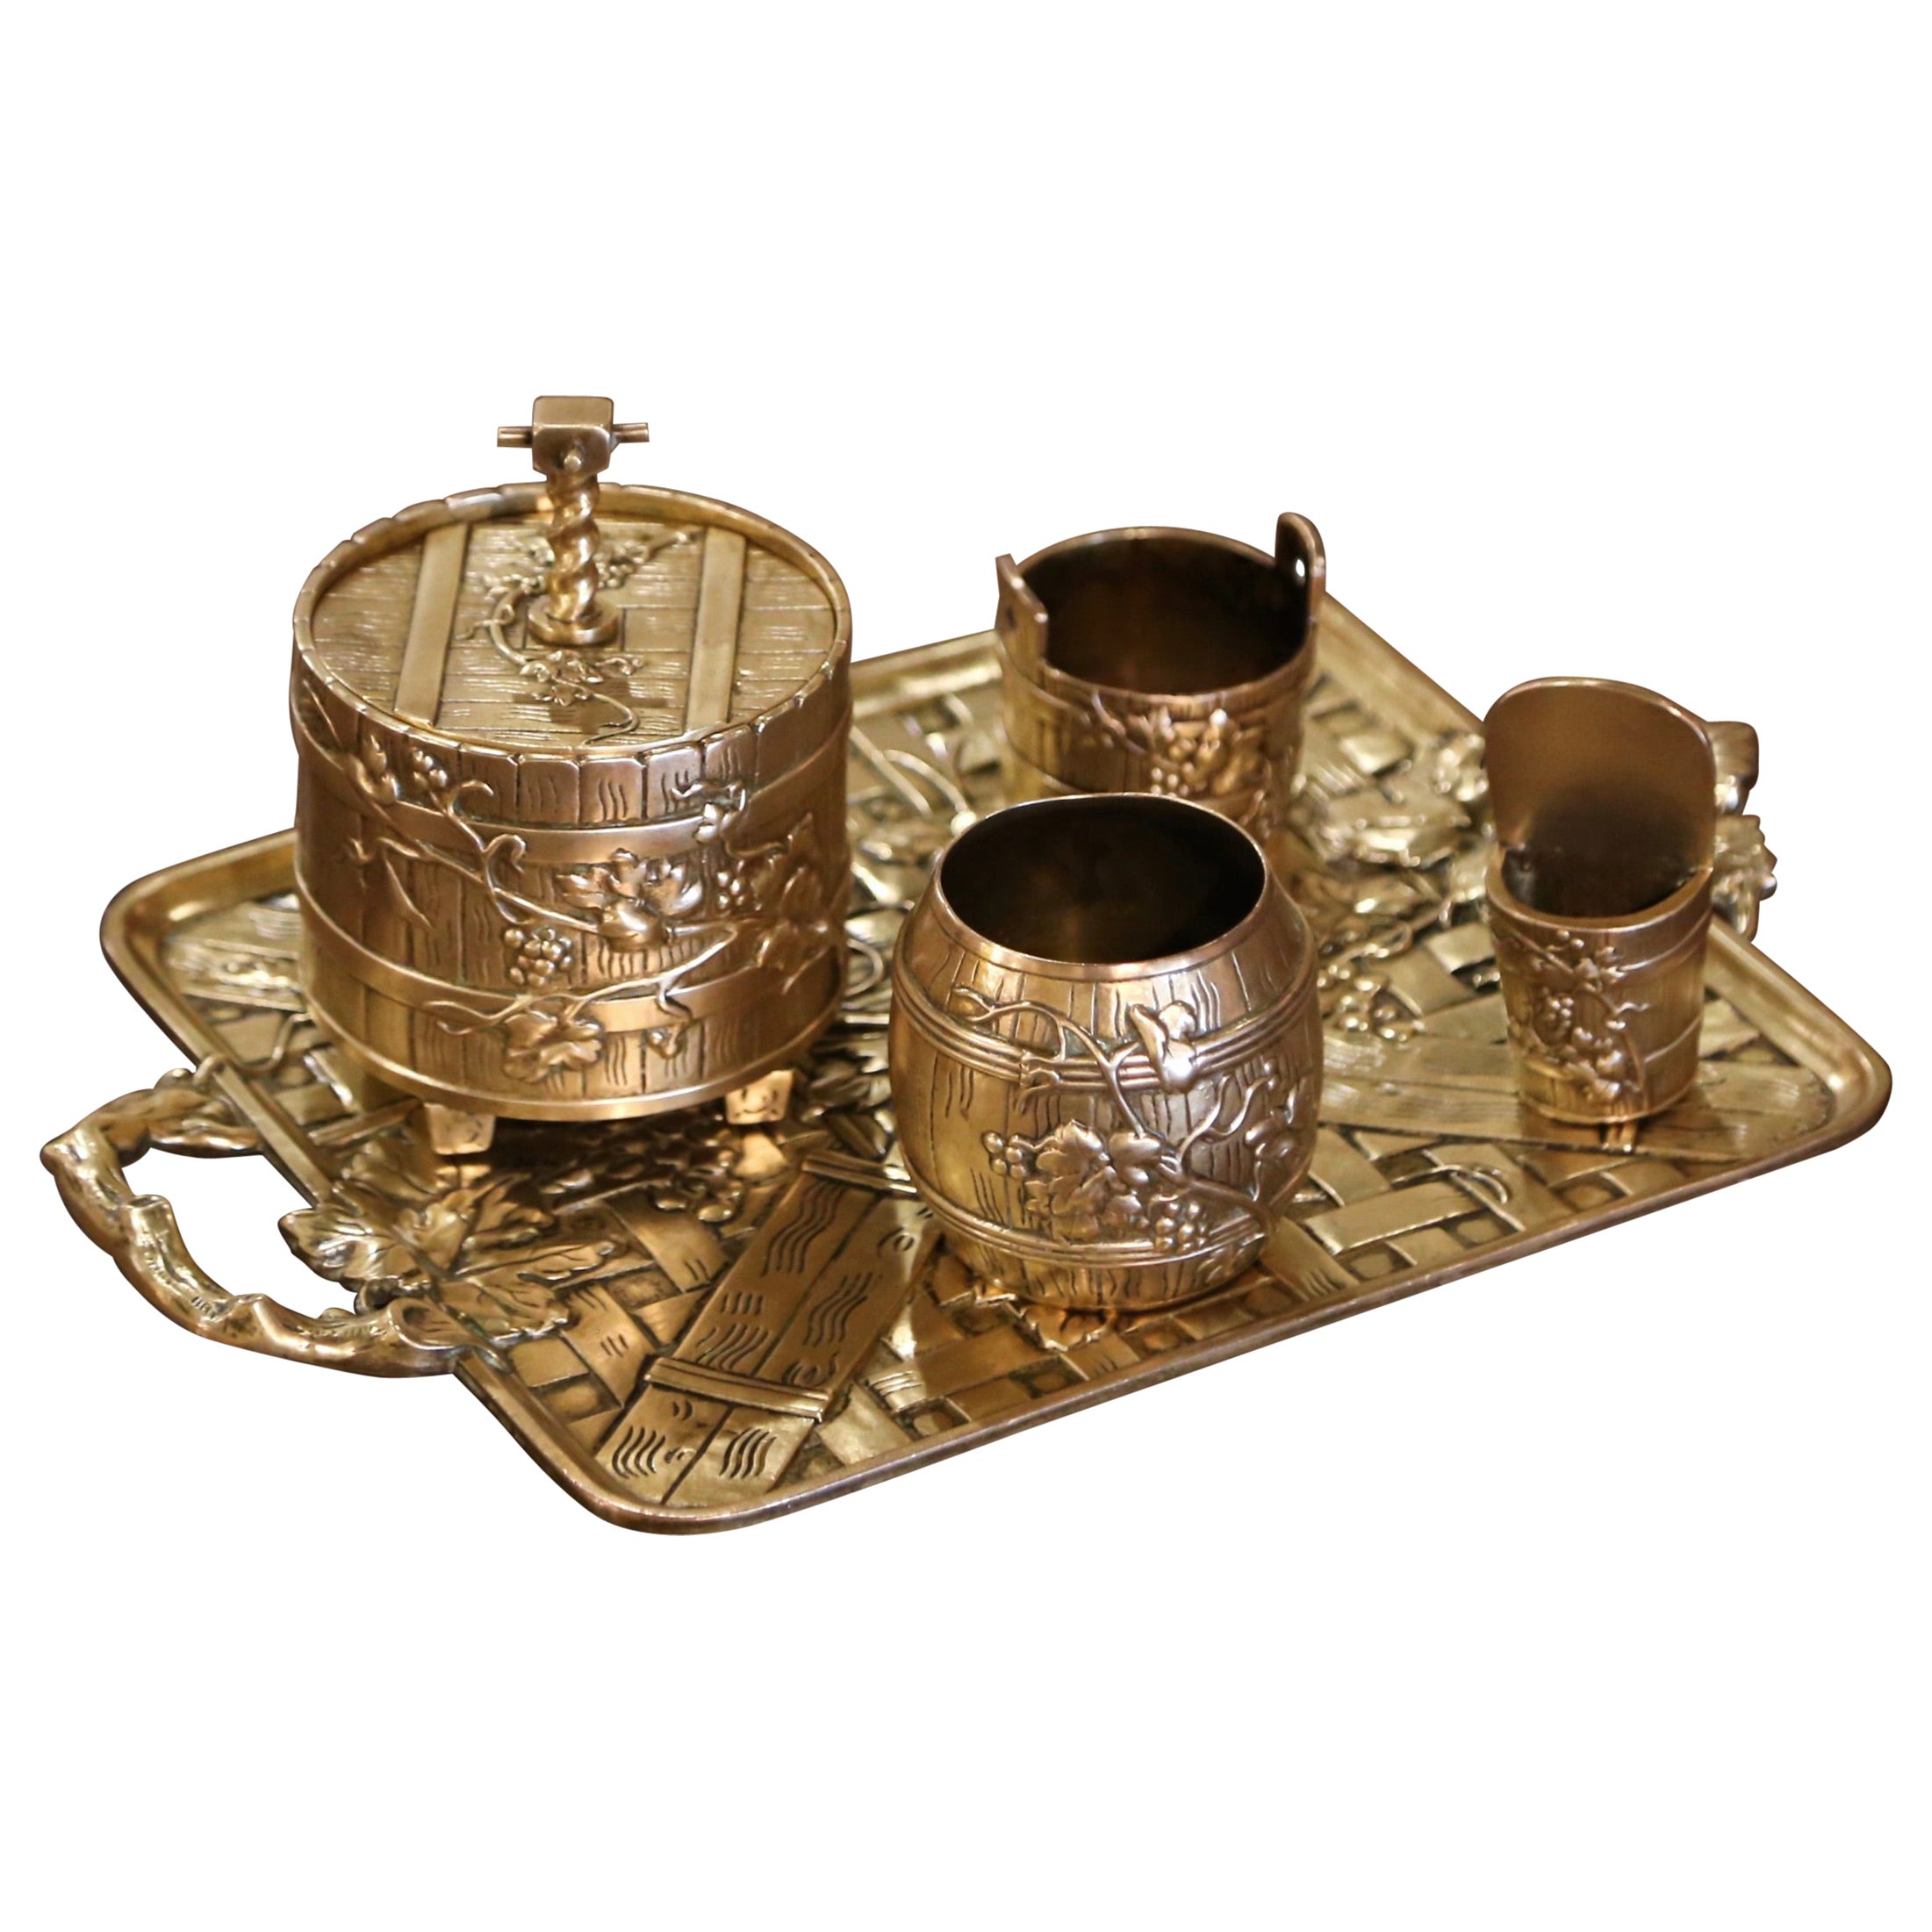 Mid-19th Century French Bronze Tobacco Tray, Five-Piece Set